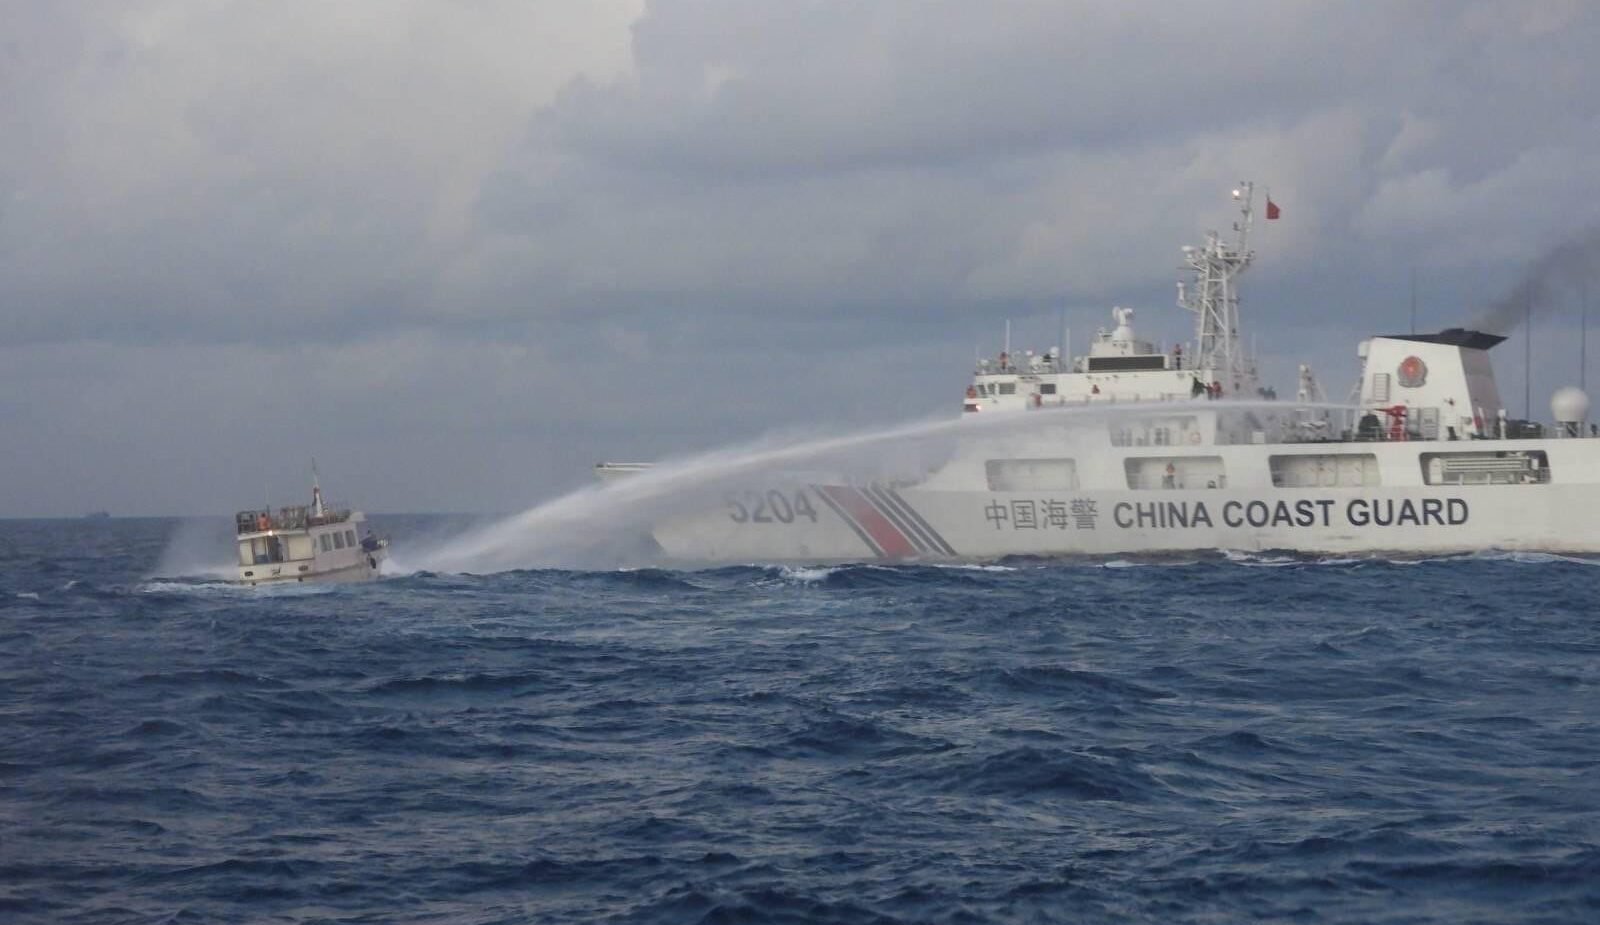 Chinese Defense Ministry Spokesperson Wu Qian told the United States to stop meddling with the West Philippine Sea issue saying that the dispute is between China and the Philippines and it has nothing to do with any third party